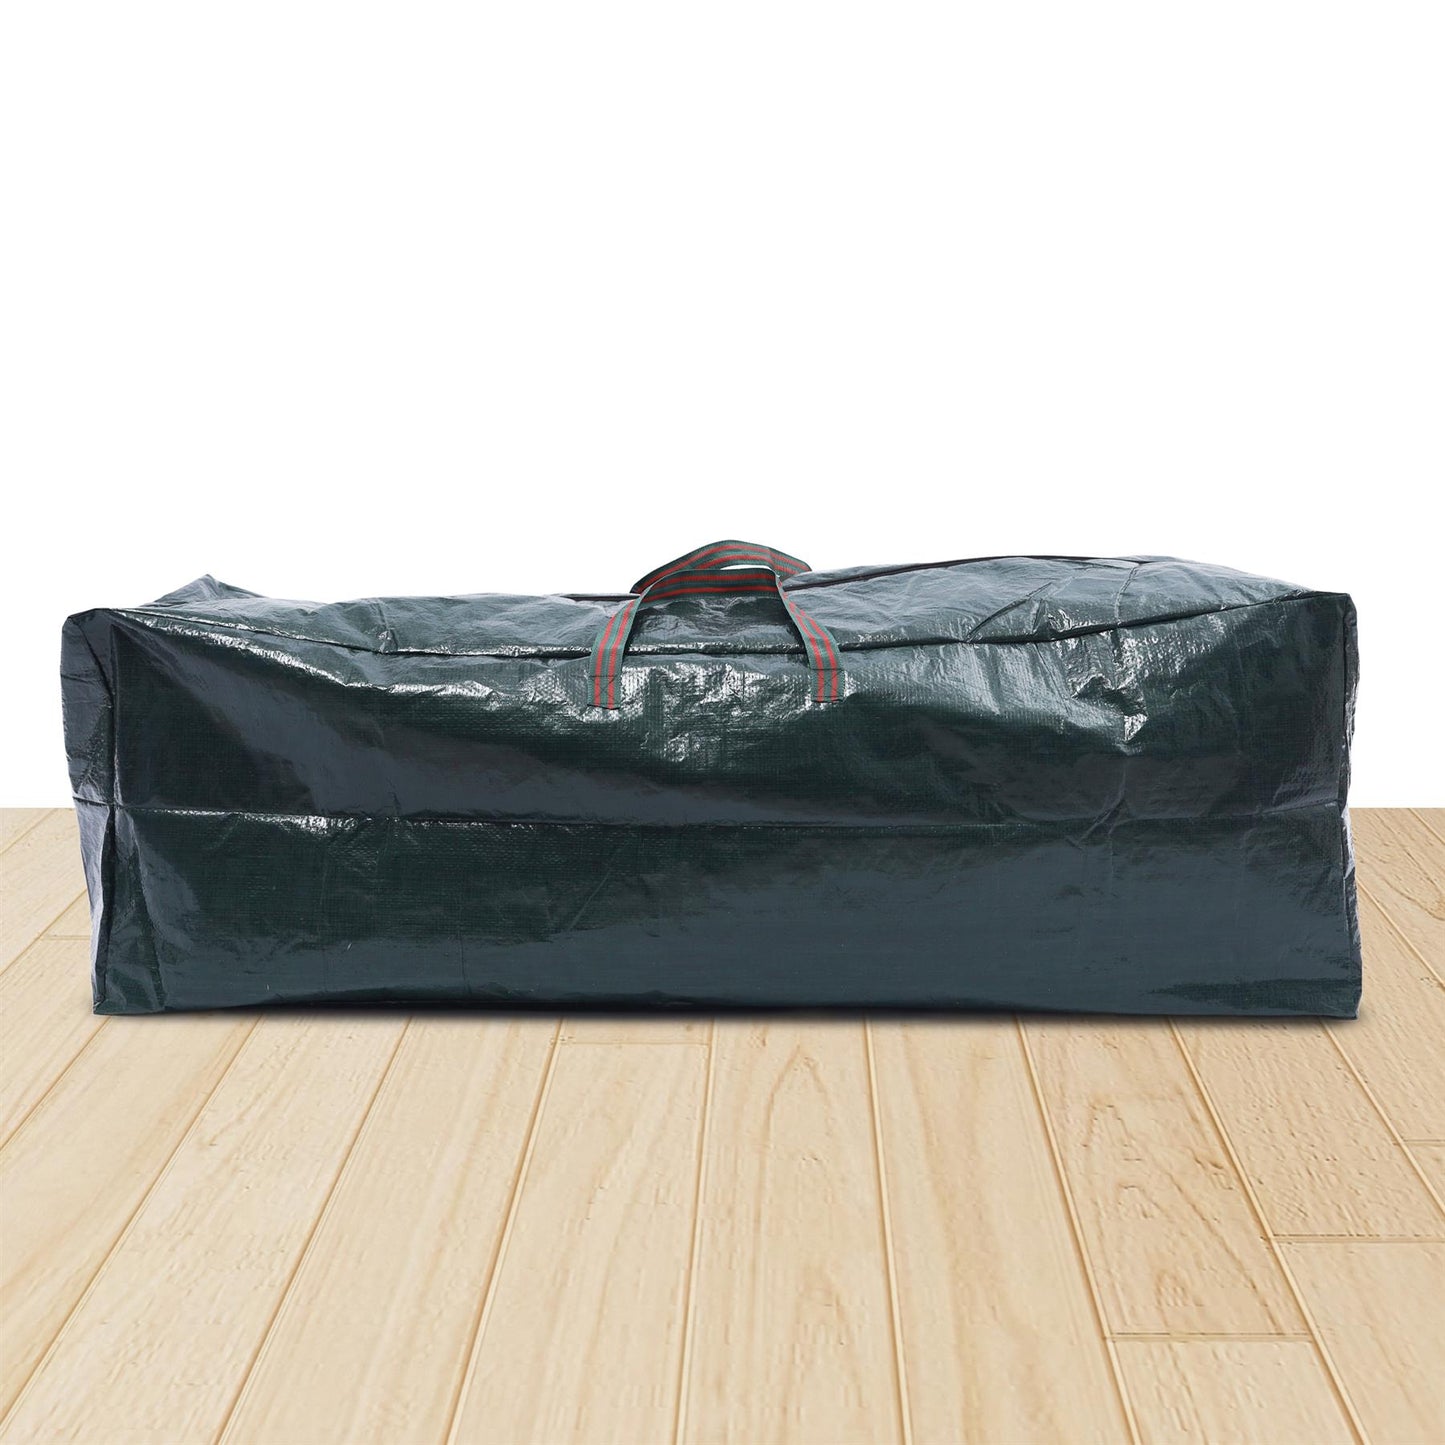 Christmas Tree And Decoration Storage Bag With Convenient Handles